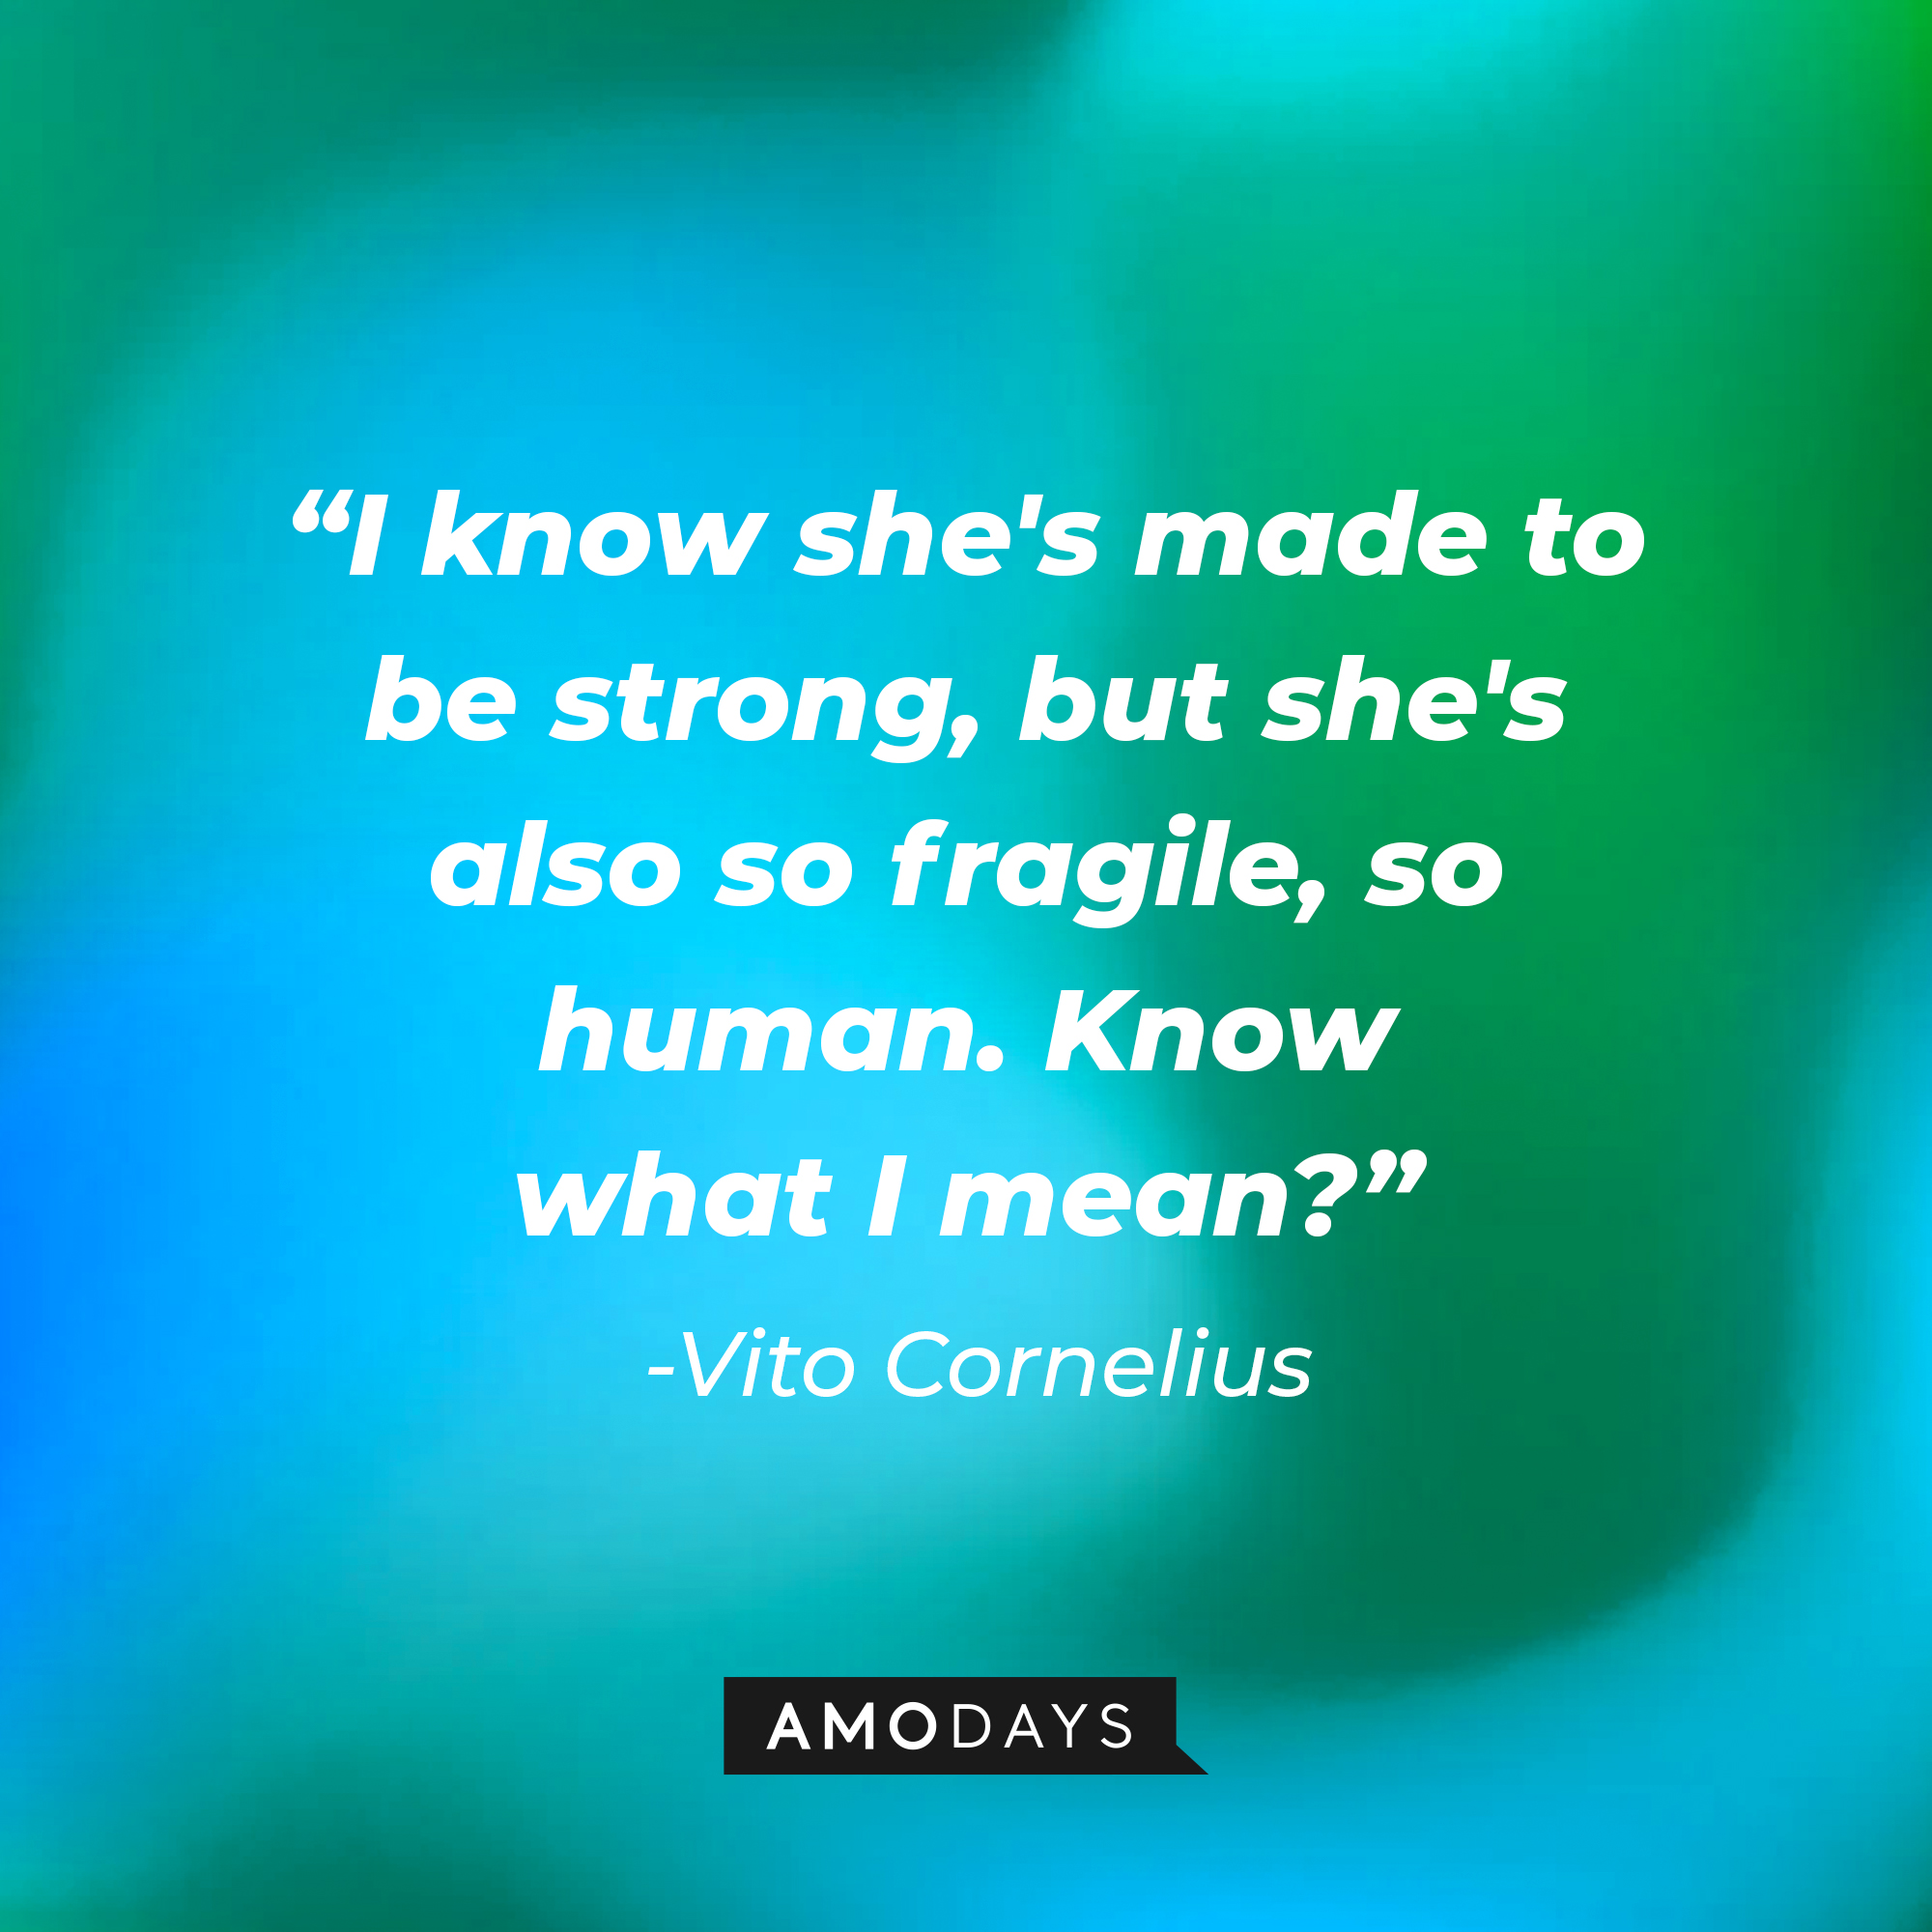 Vito Cornelius' quote: "I know she's made to be strong, but she's also fragile, so human. Know what I mean?" | Source: Amodays